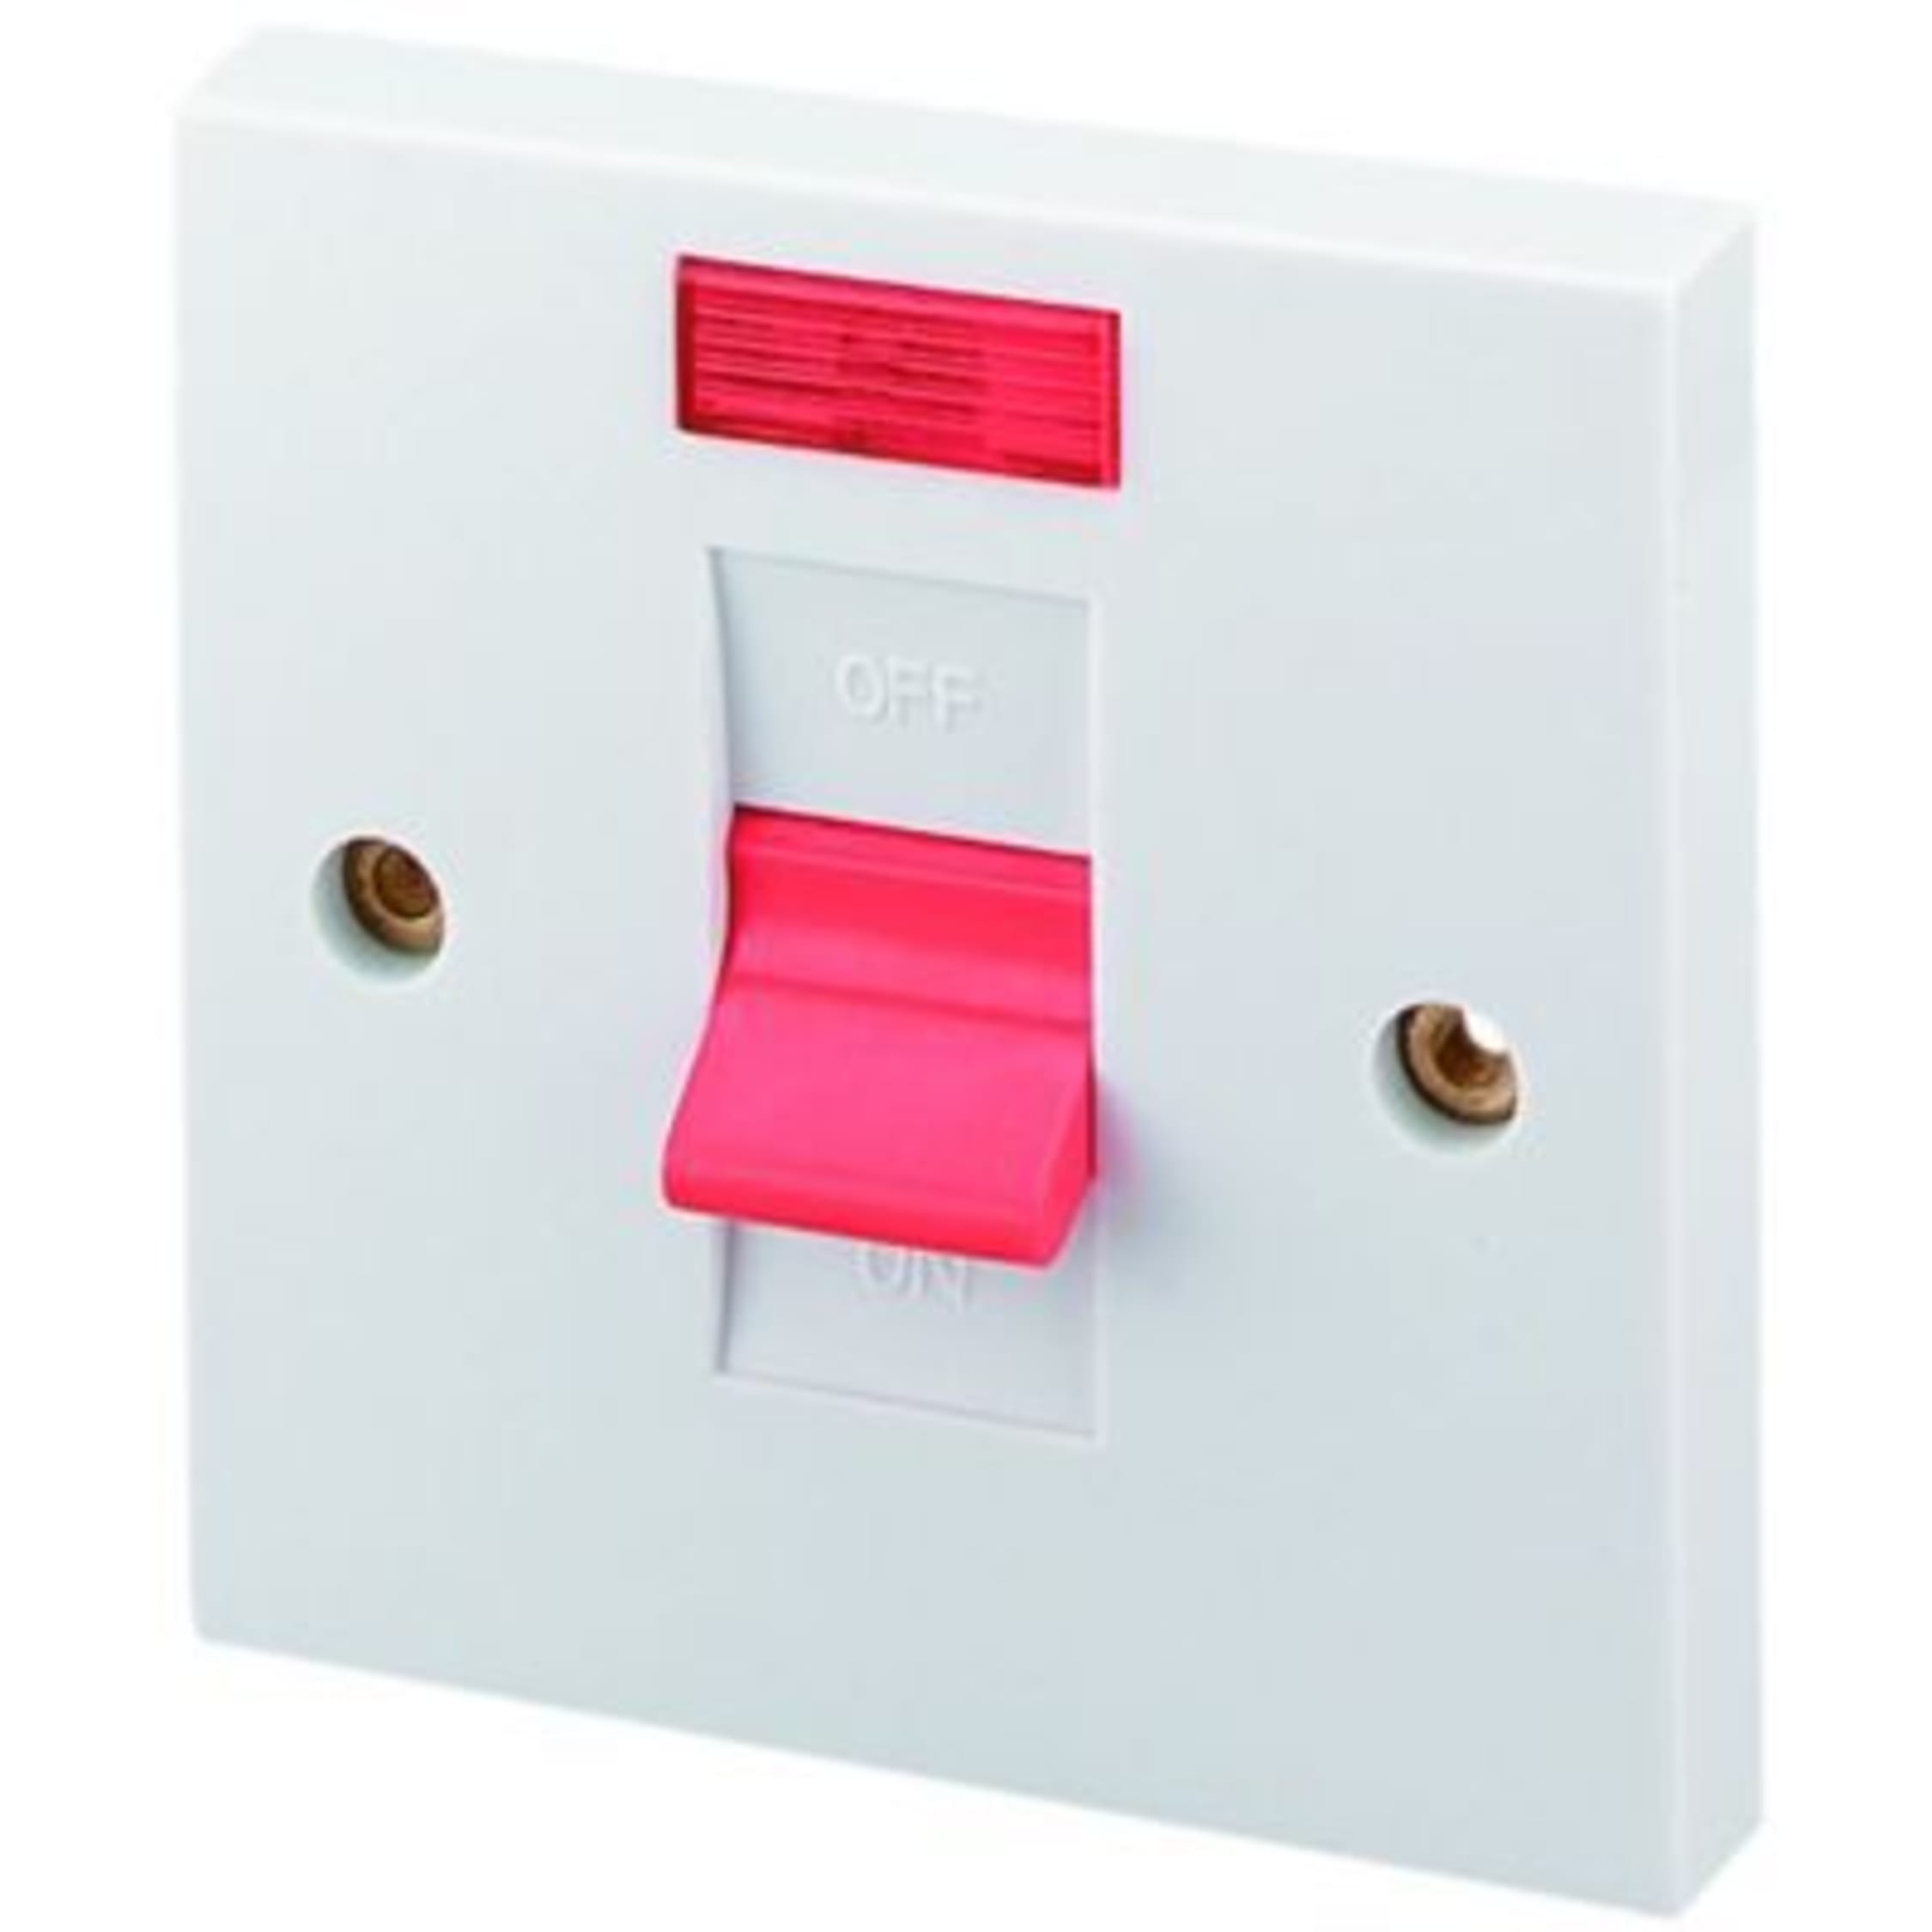 SHOWER SWITCH WITH NEON 45 amp FITS STANDARD TWIN TYPE BOX BY GET COOKER SWITCH 